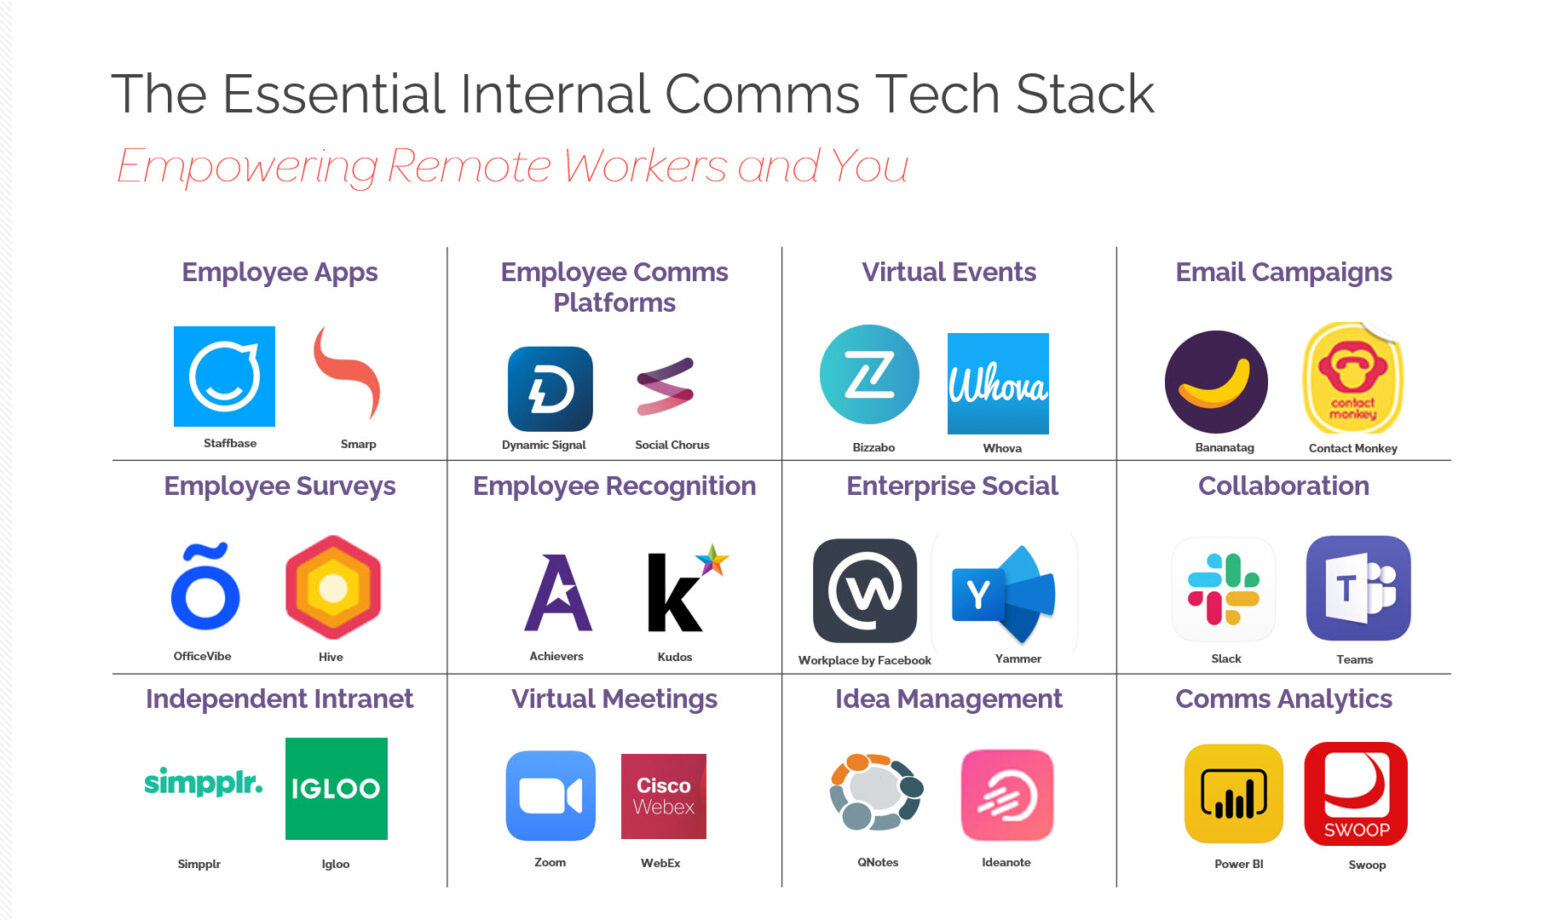 ROI Tech Talk: New Ways to Use Tech to Engage Your Remote Workforce